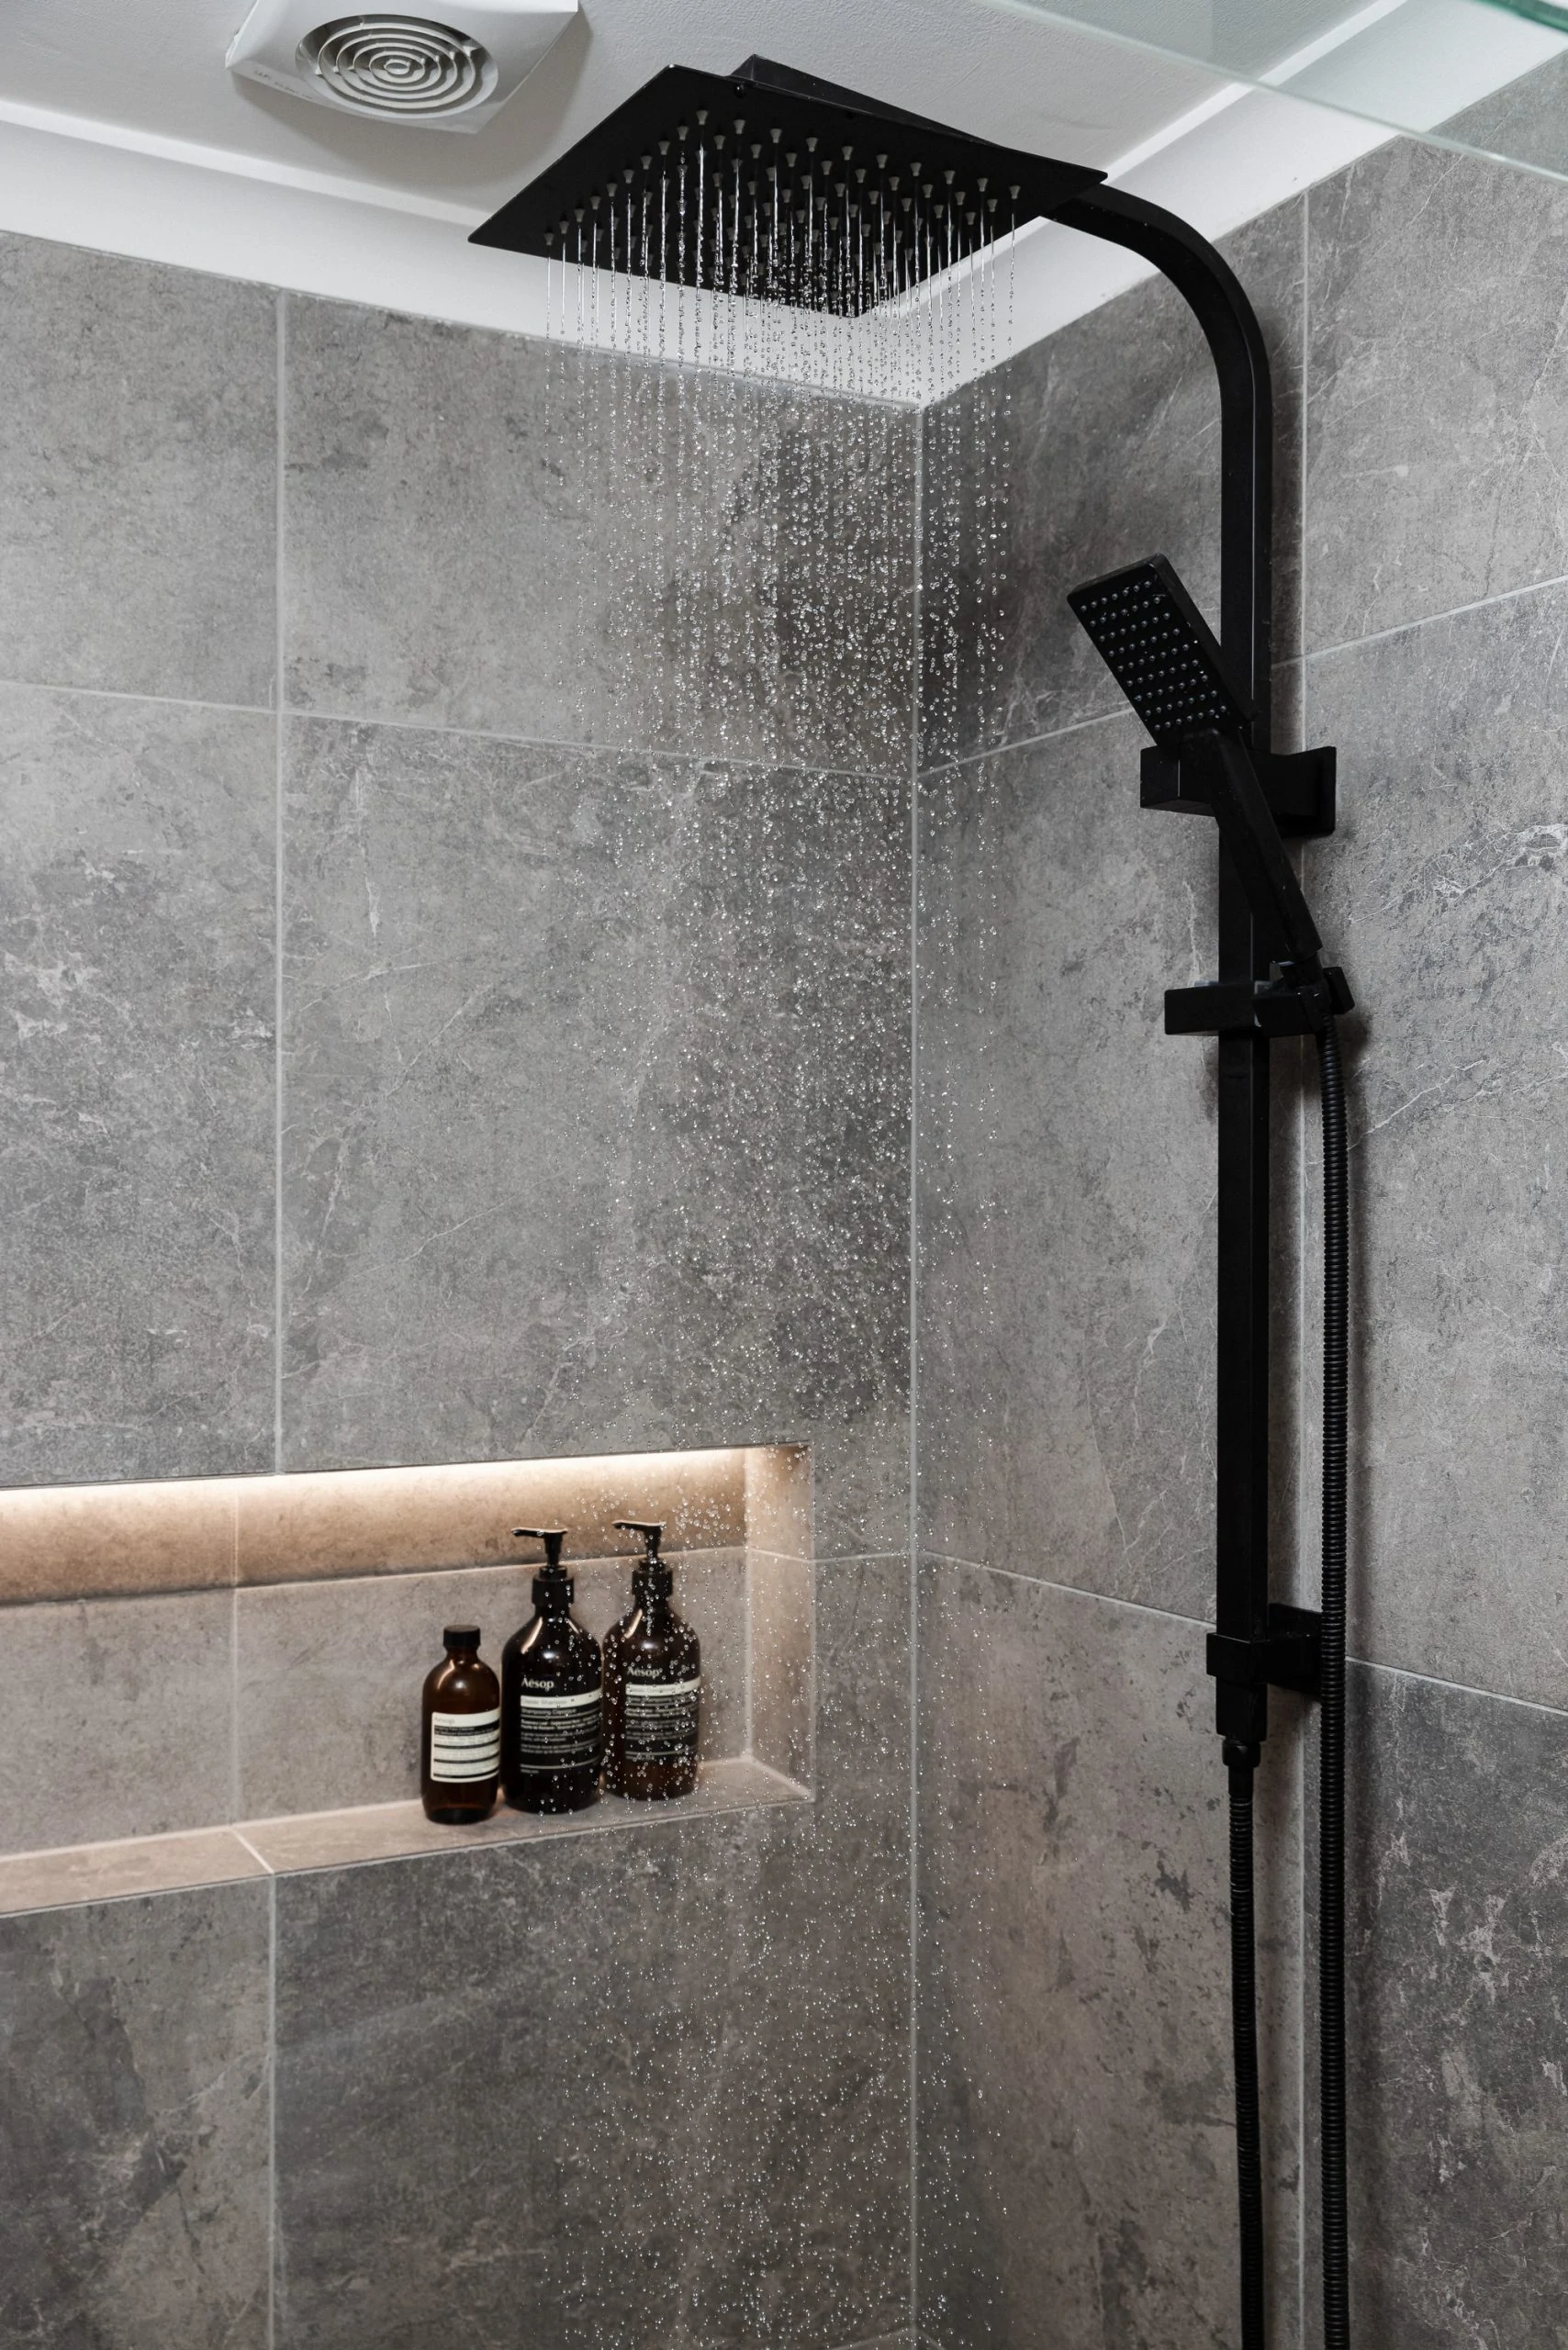 Square rainfall shower in black with a bathroom niche with products